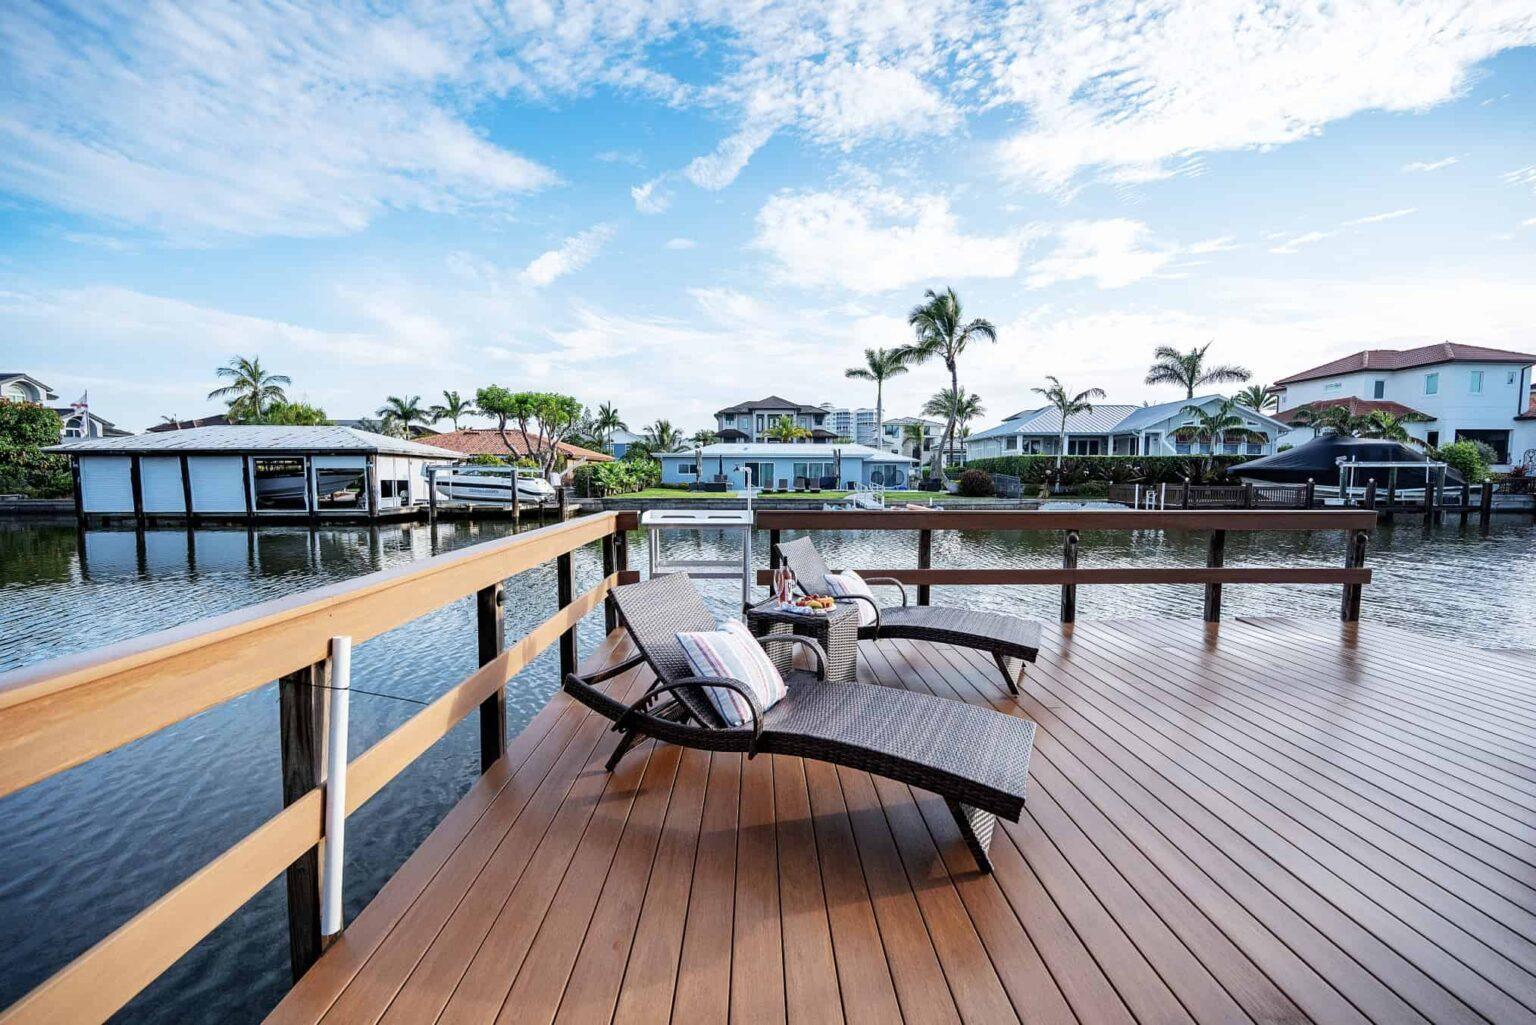 naples fl vacation home Private Boat Dock with lounge chairs and fish-cleaning station in background. with backyard patio overlooking canal